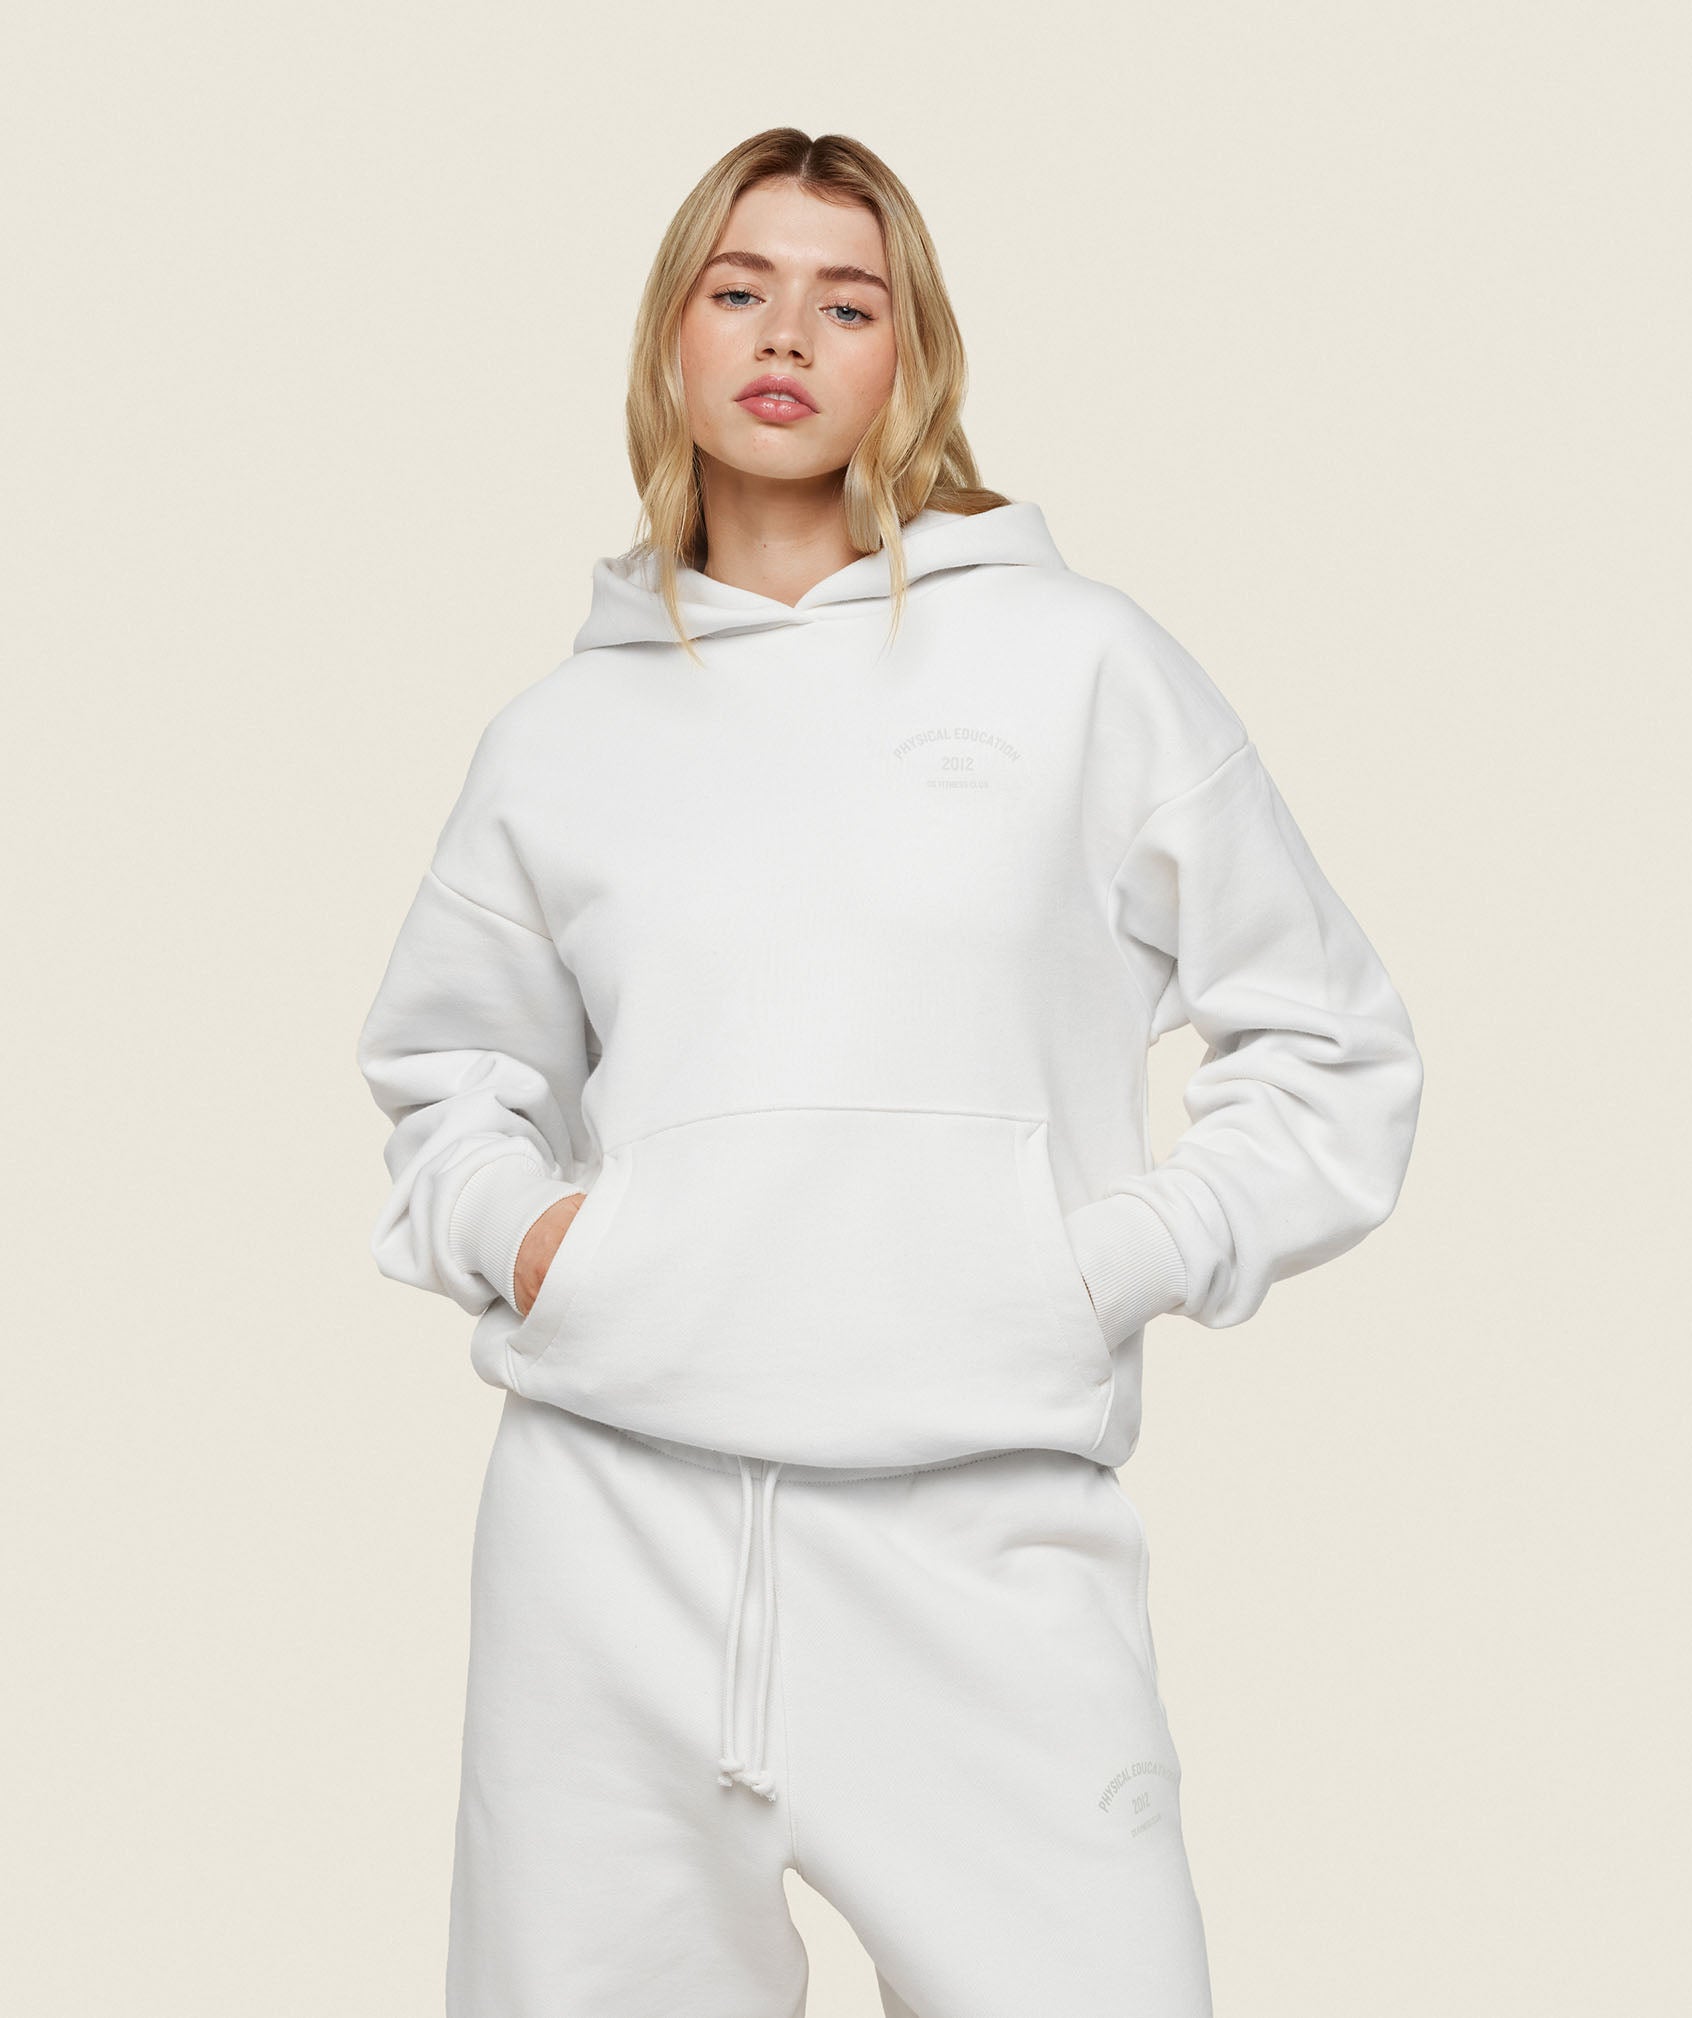 Phys Ed Graphic Hoodie in Ecru White - view 1